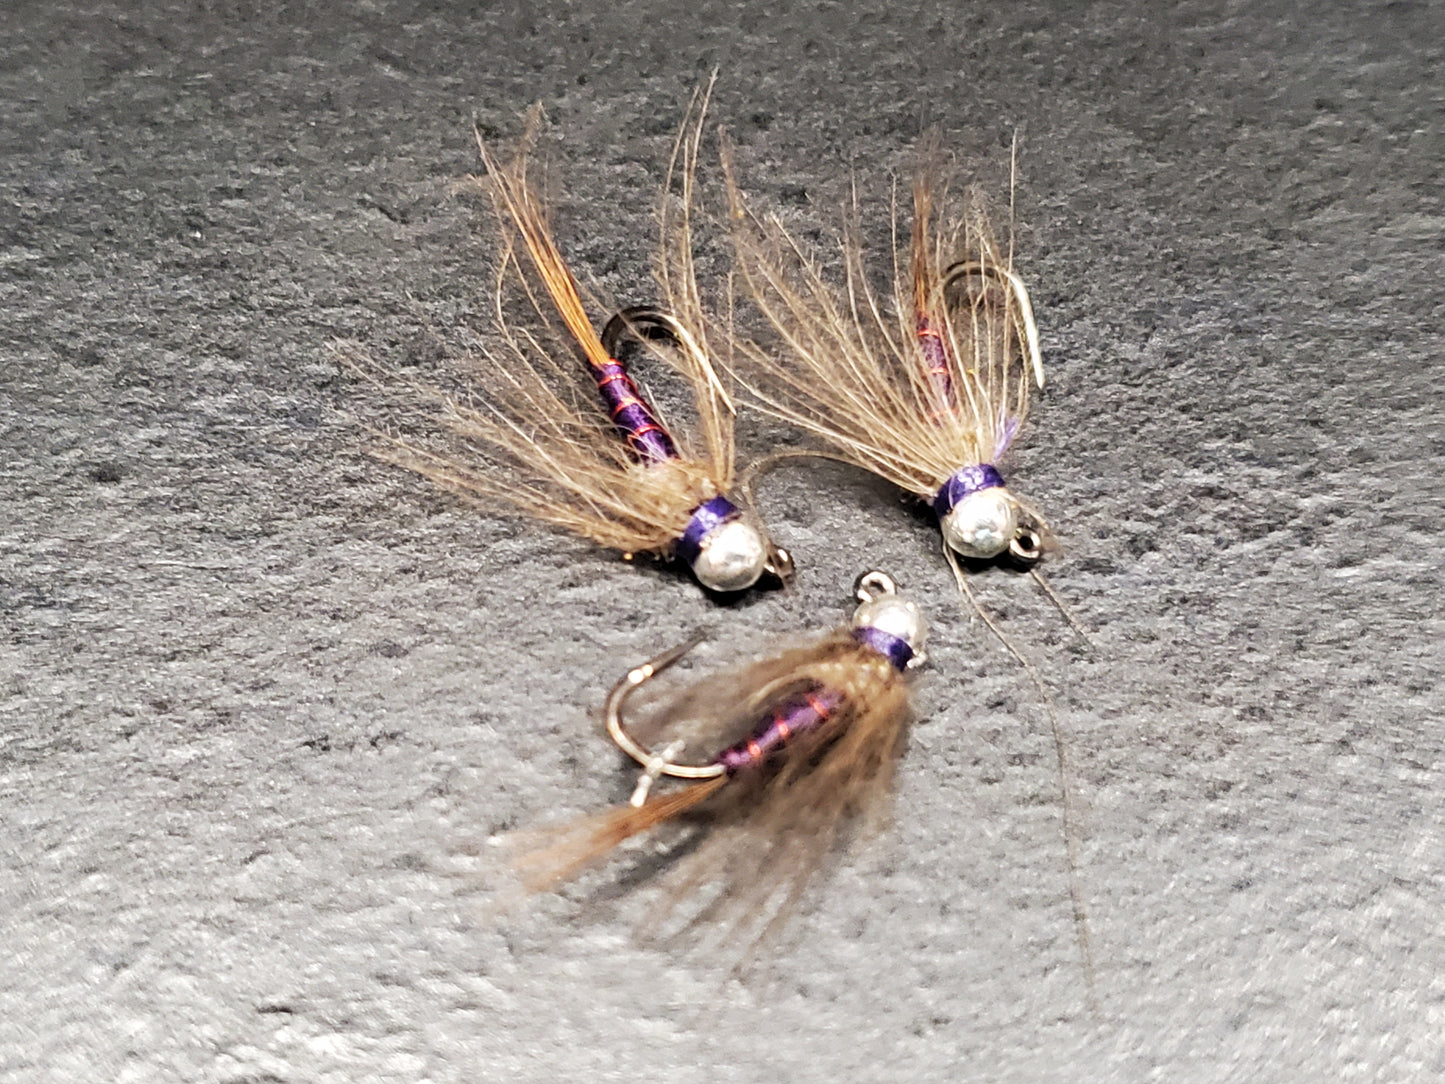 39 Tungsten Bead Trout Jigs, Jig Fly Selection, Trout Jigs, Tungsten Nymph